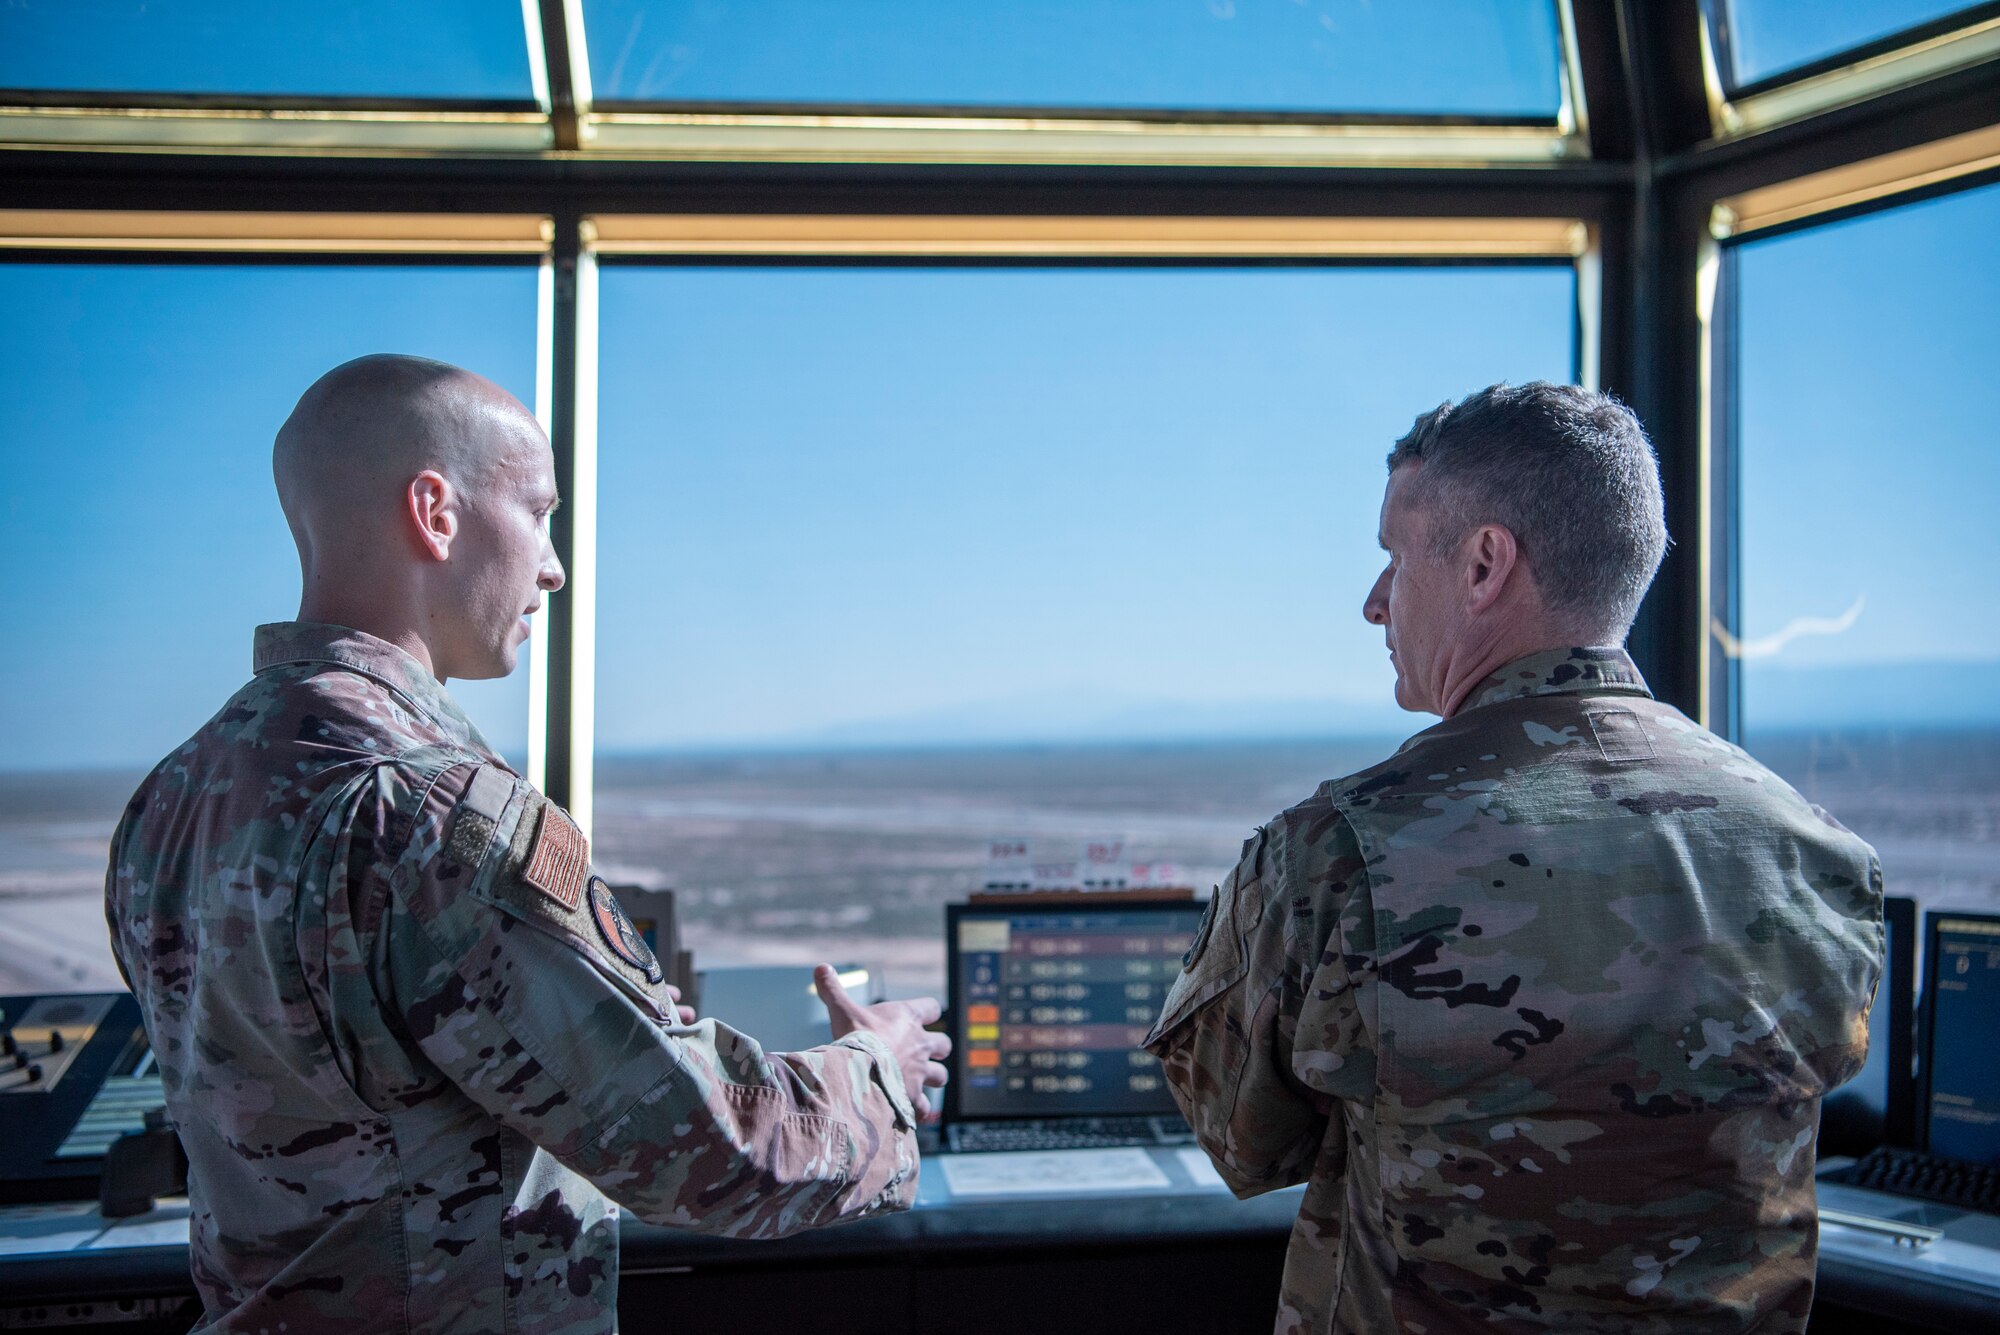 U.S. Air Force Staff Sgt. Corey Jones, 54th Operations Support Squadron tower watch supervisor, shows U.S. Army Brig. Gen. Eric Little, White Sands Missile Range commander, the air traffic control tower, July 9, 2021, on Holloman Air Force Base, New Mexico. Little visited Holloman AFB to familiarize with local operations and tour partner units. (U.S. Air Force photo by Airman 1st Class Jessica Sanchez)